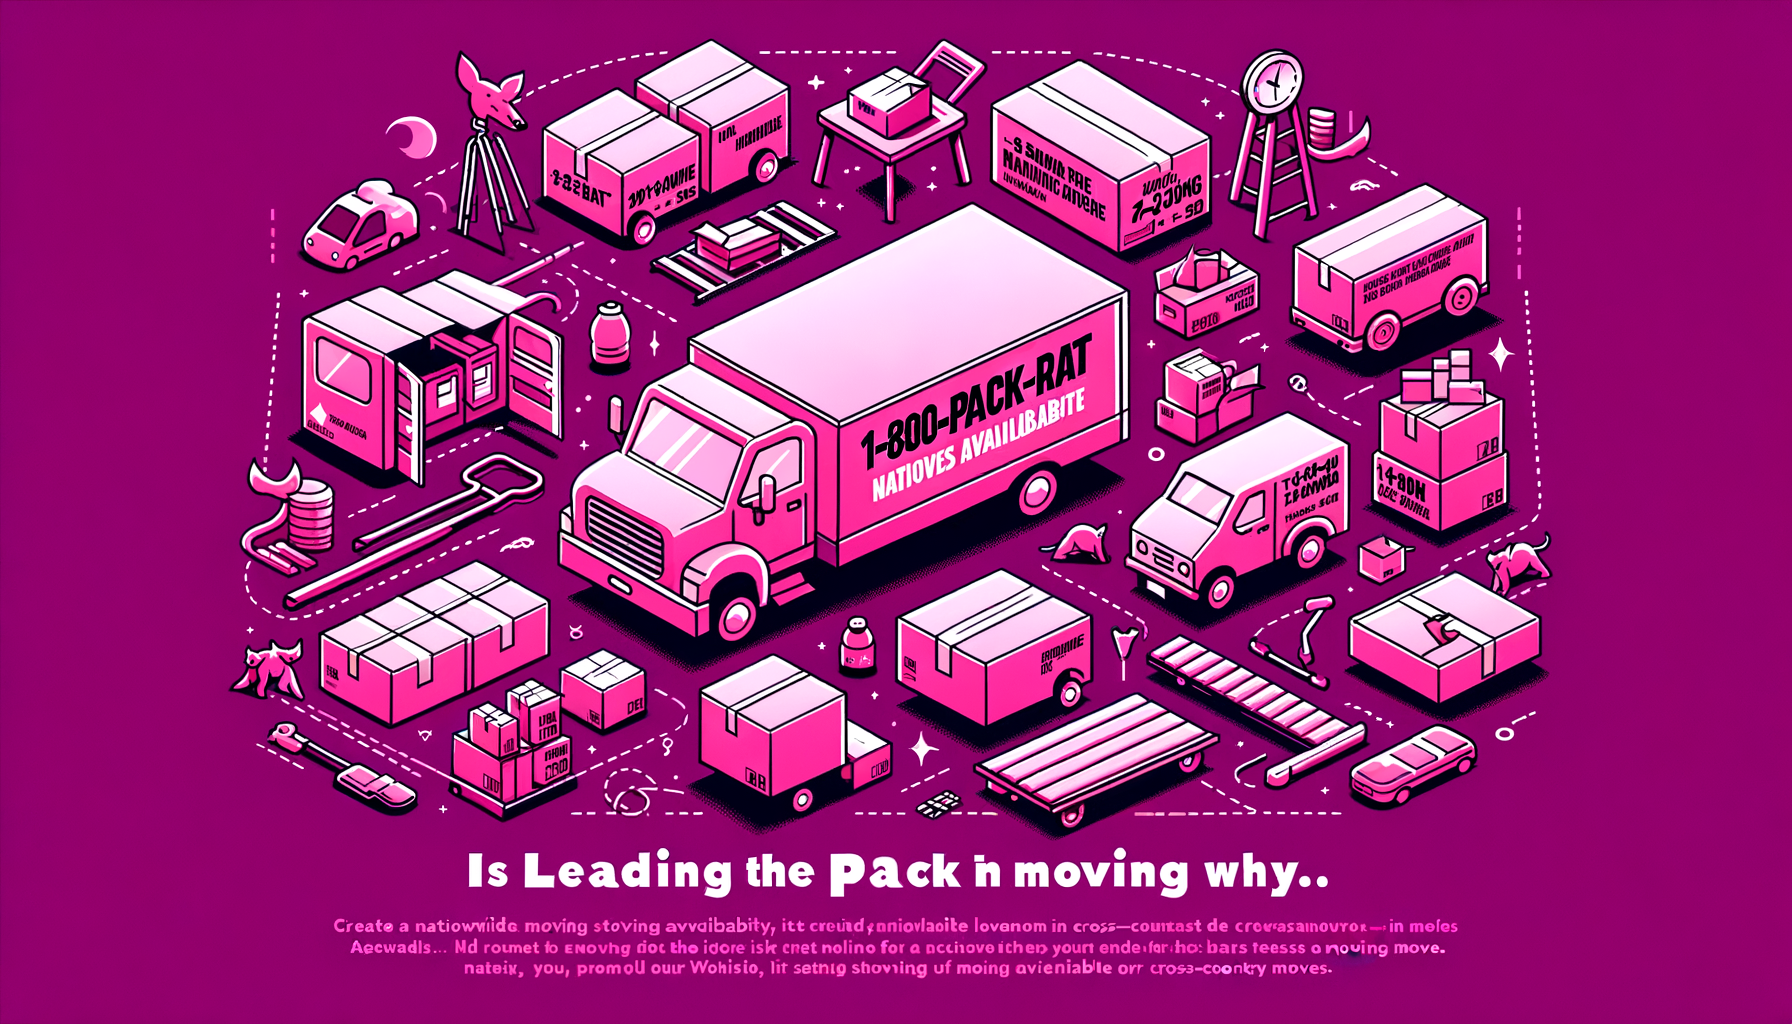 Cartoon-like image in fuschia featuring a smiling moving truck with the logo '1-800-PACK-RAT', illustrating nationwide availability for cross-country moves, with outlines of various states in the background.